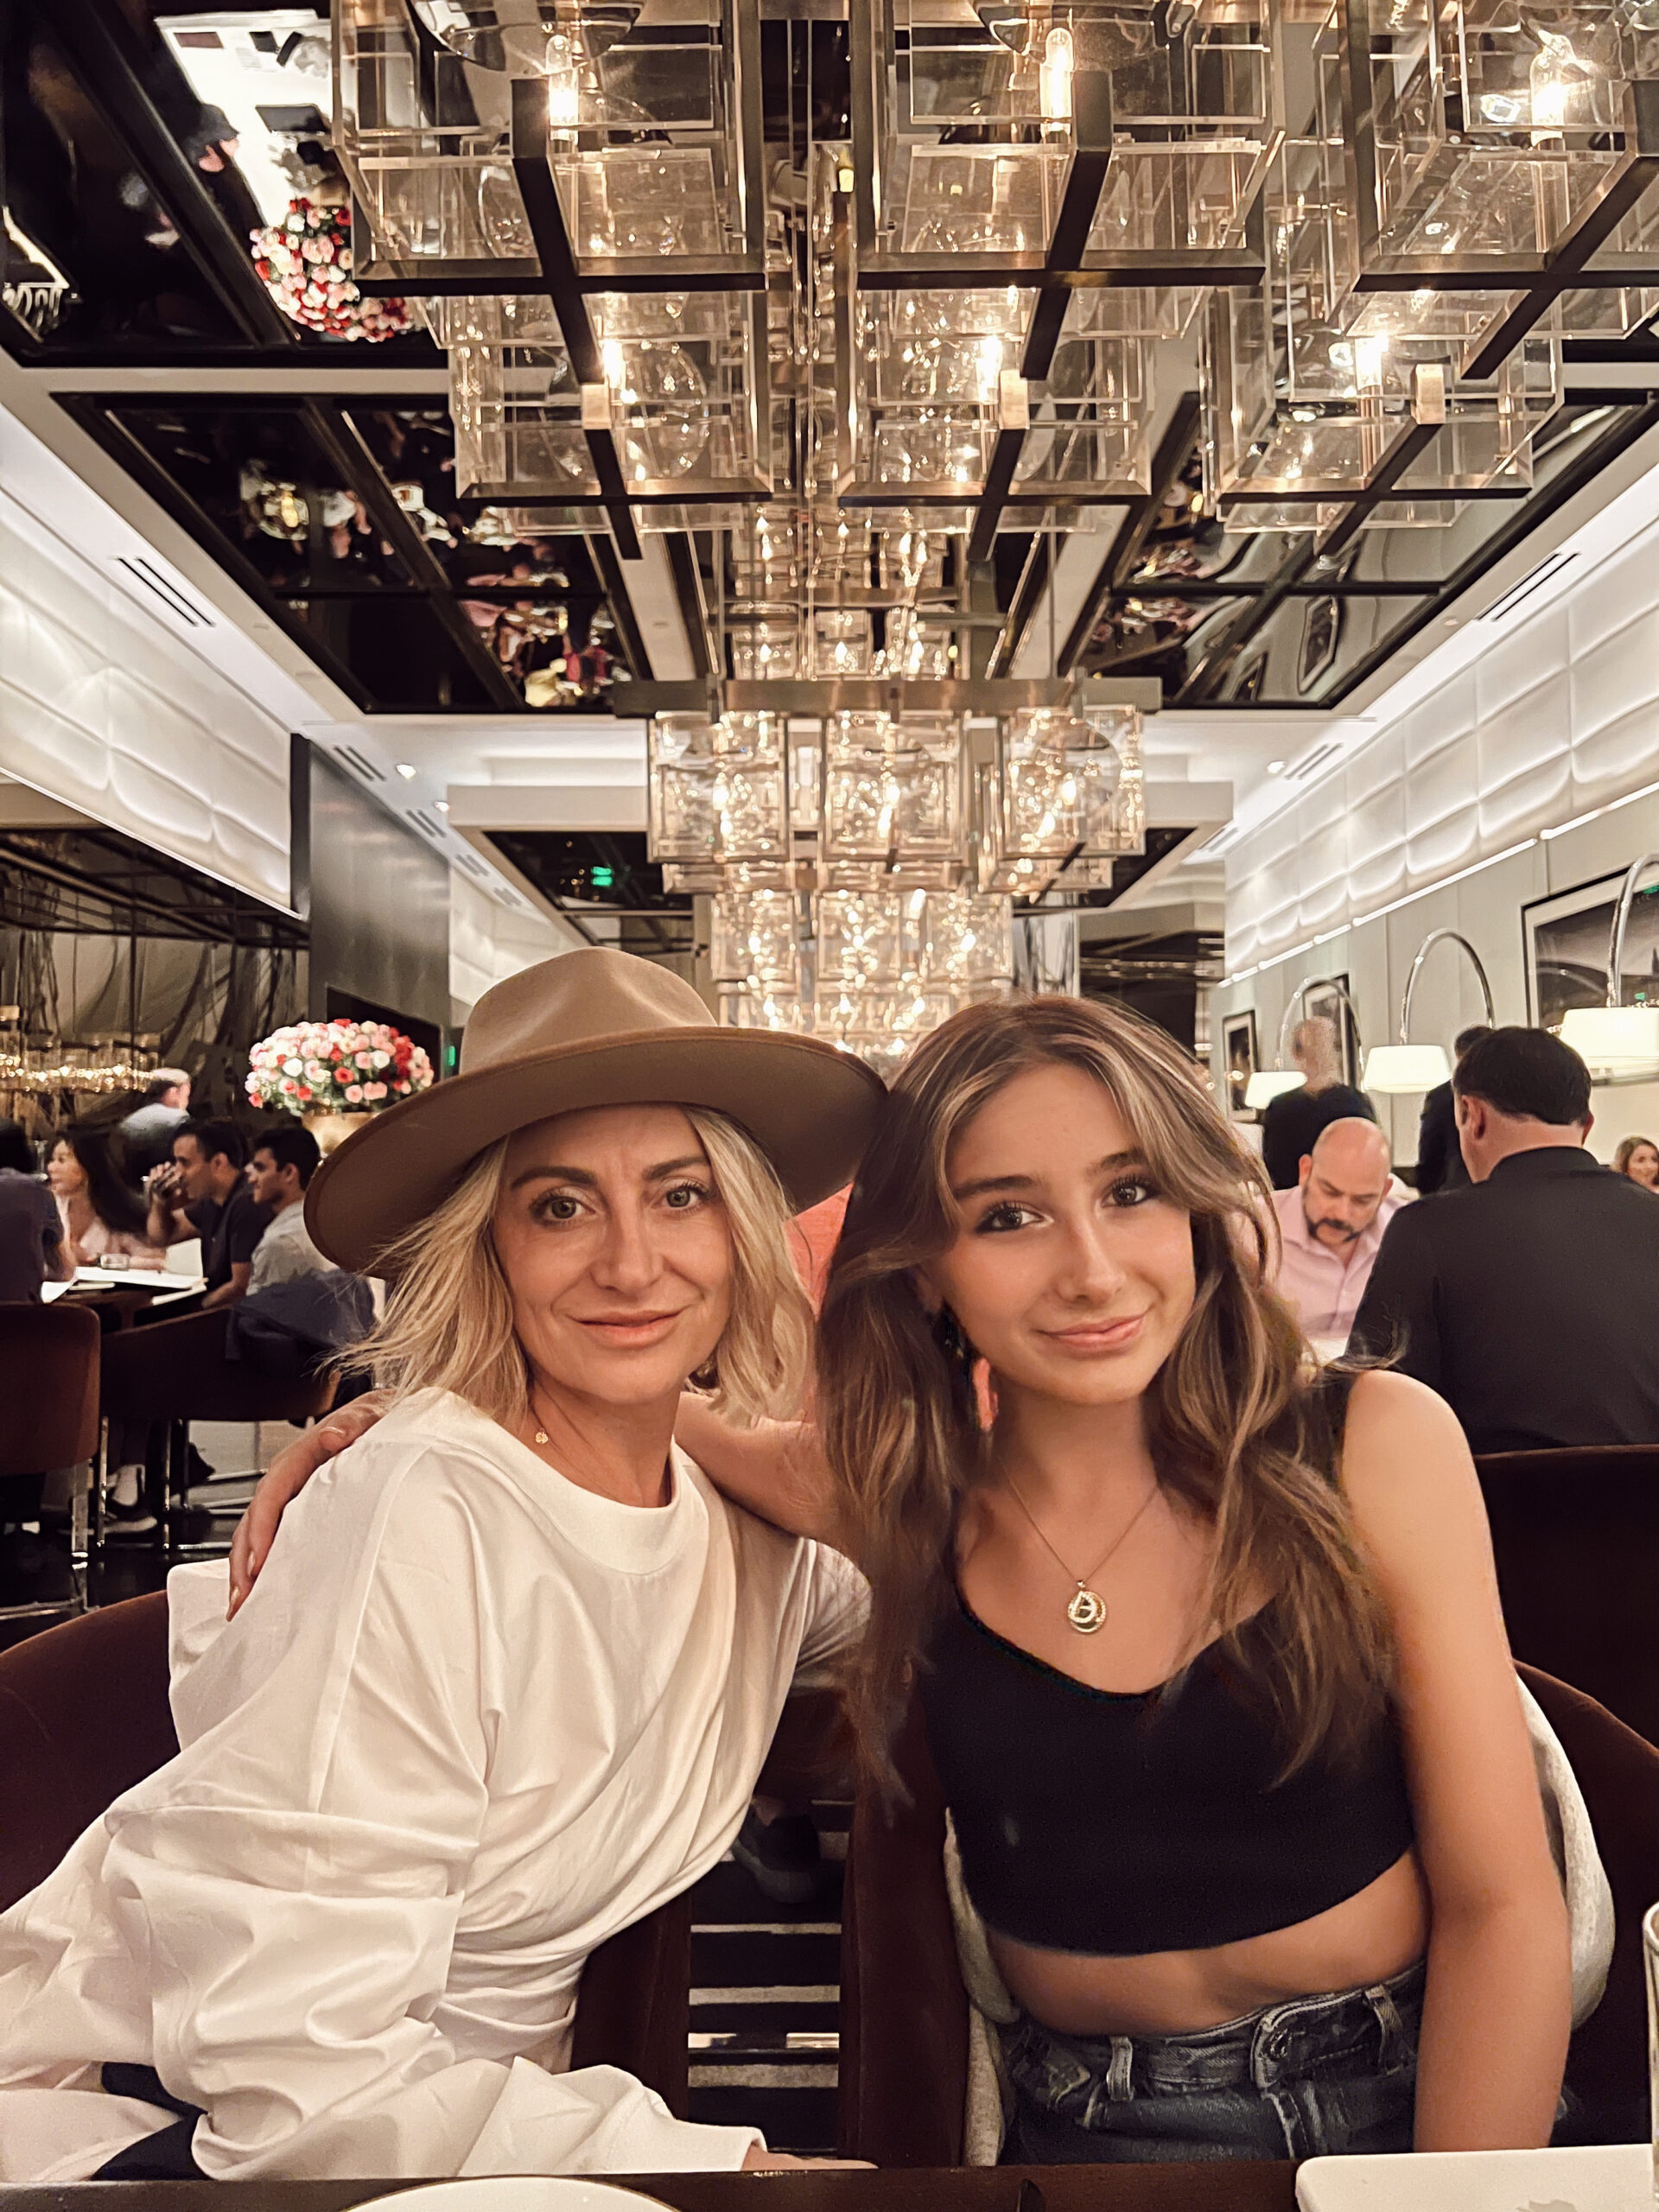 mom and daughter in restaurant